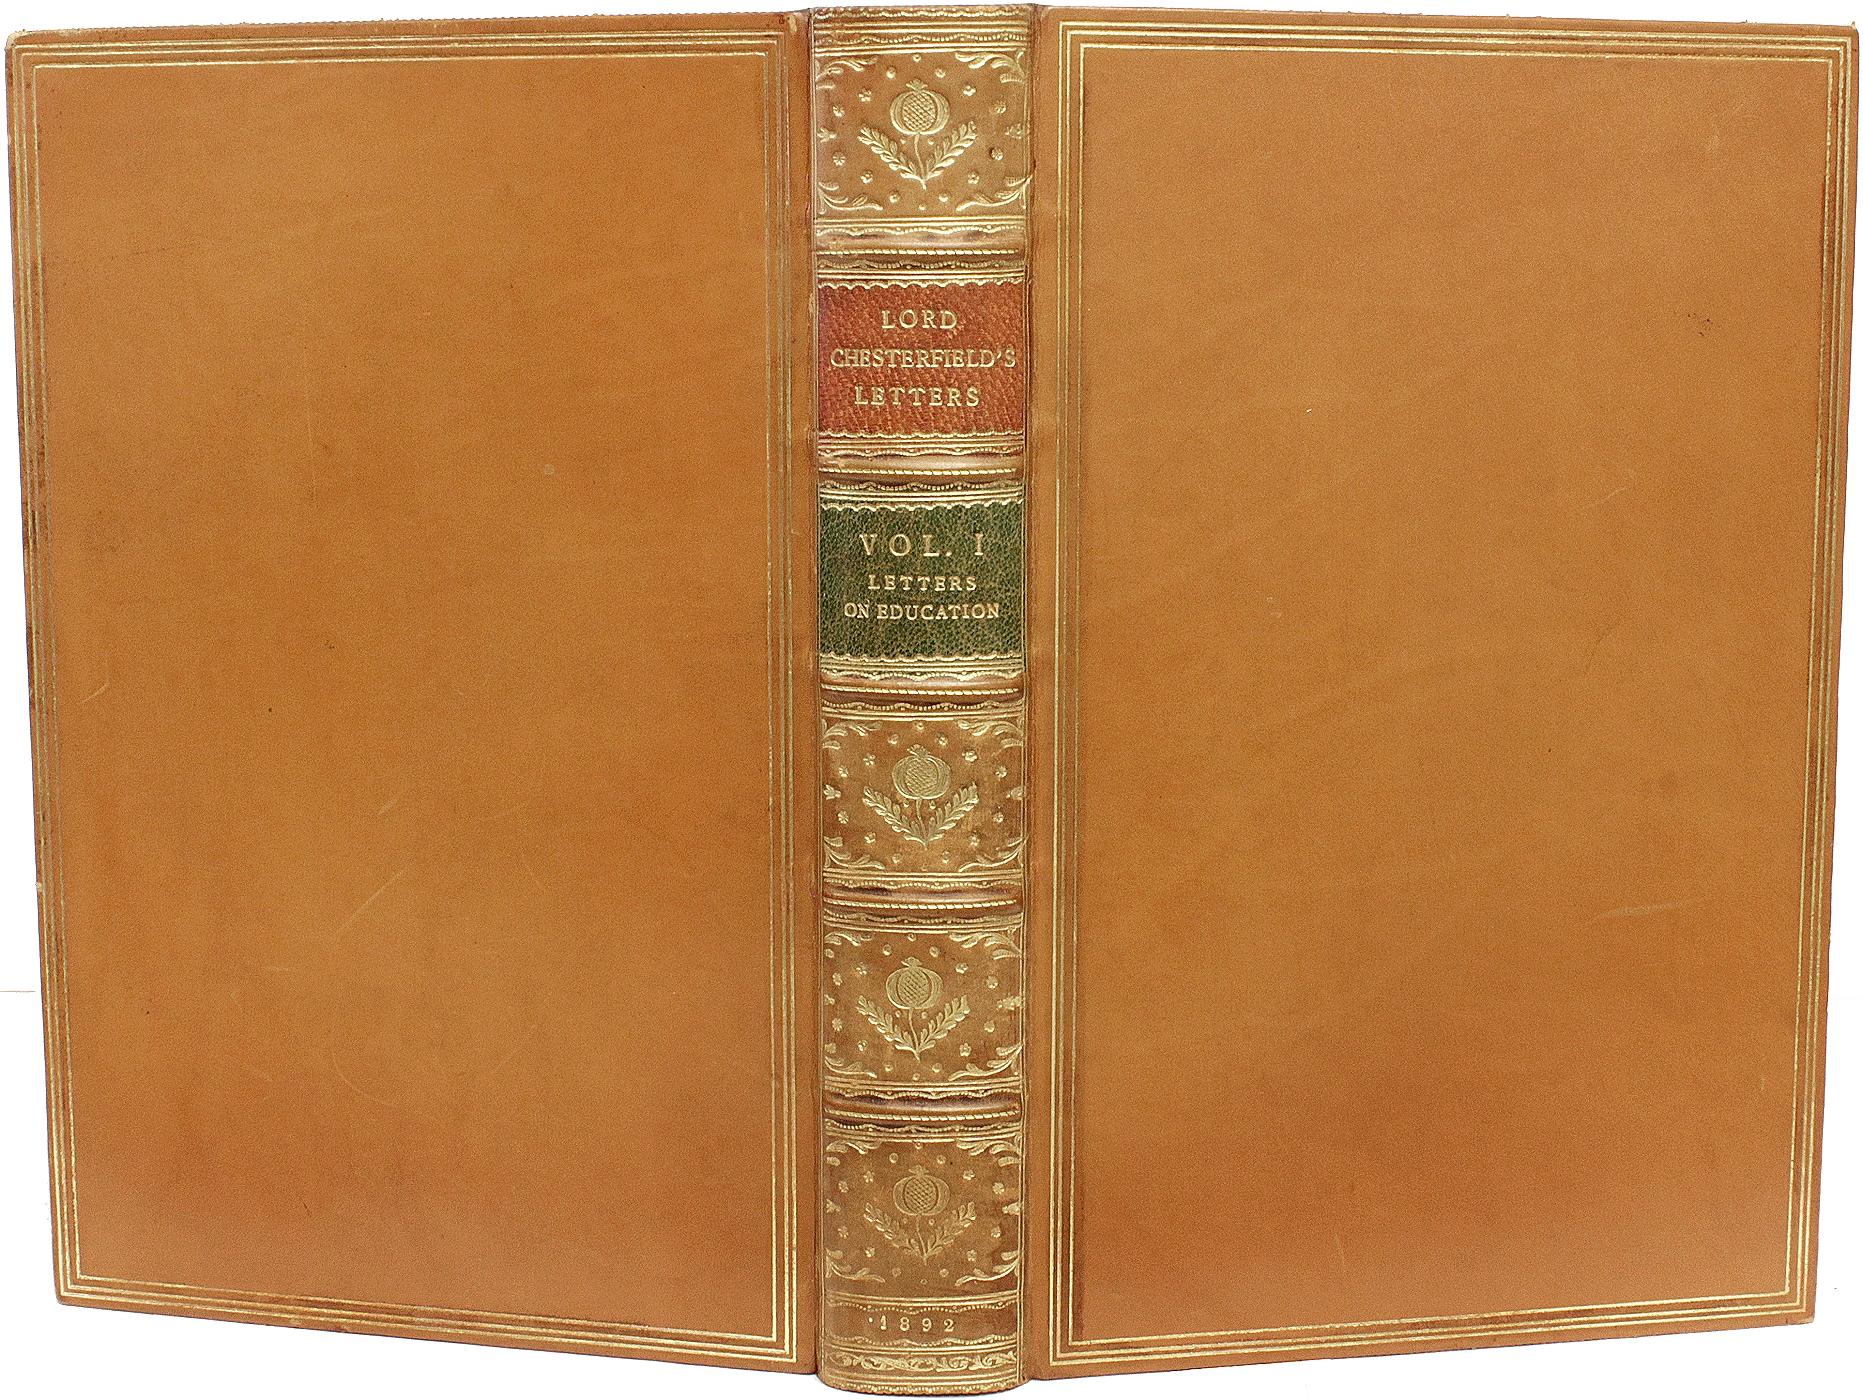 British MAHON, Lord. The Letters Of Philip Dormer Stanhope. 5 vols. 1892 IN FULL LEATHER For Sale